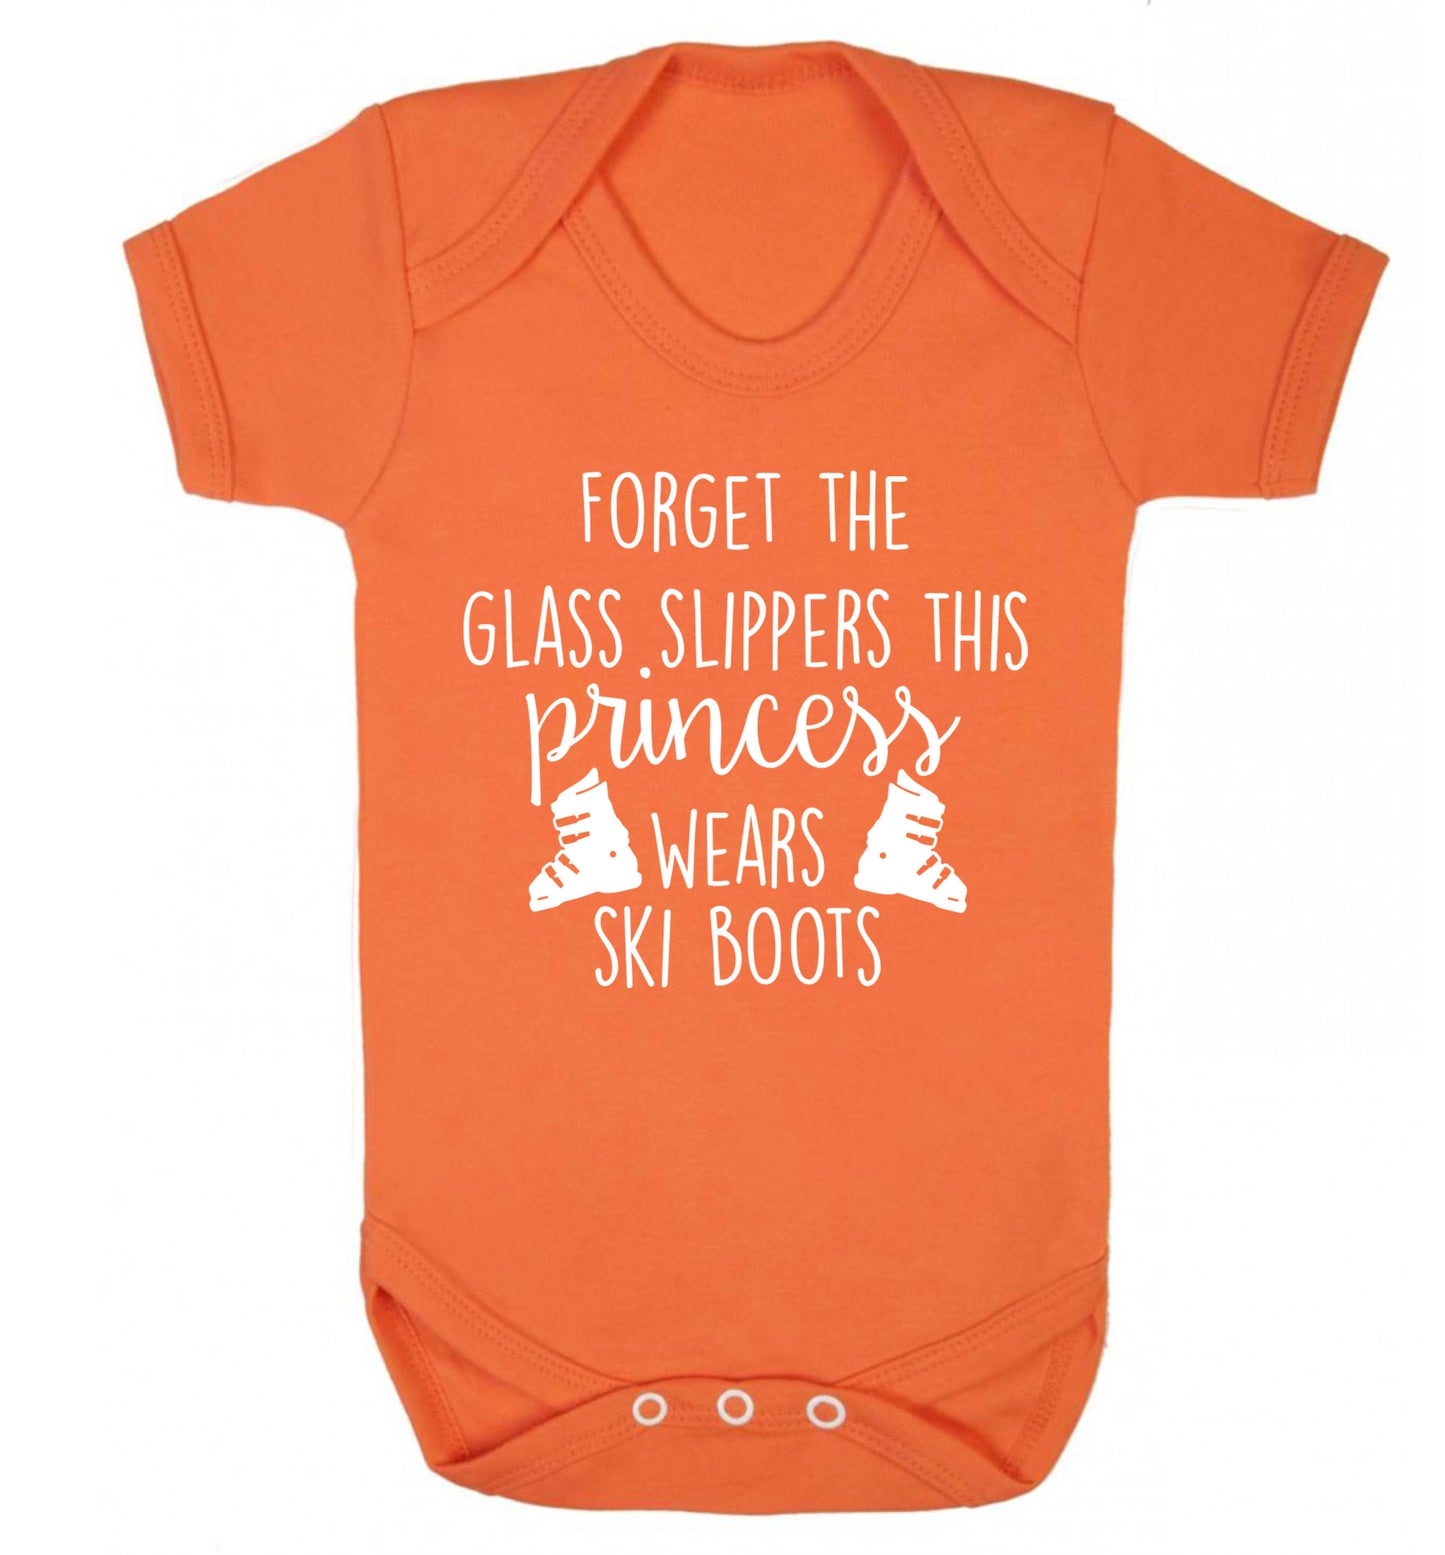 Forget the glass slippers this princess wears ski boots Baby Vest orange 18-24 months